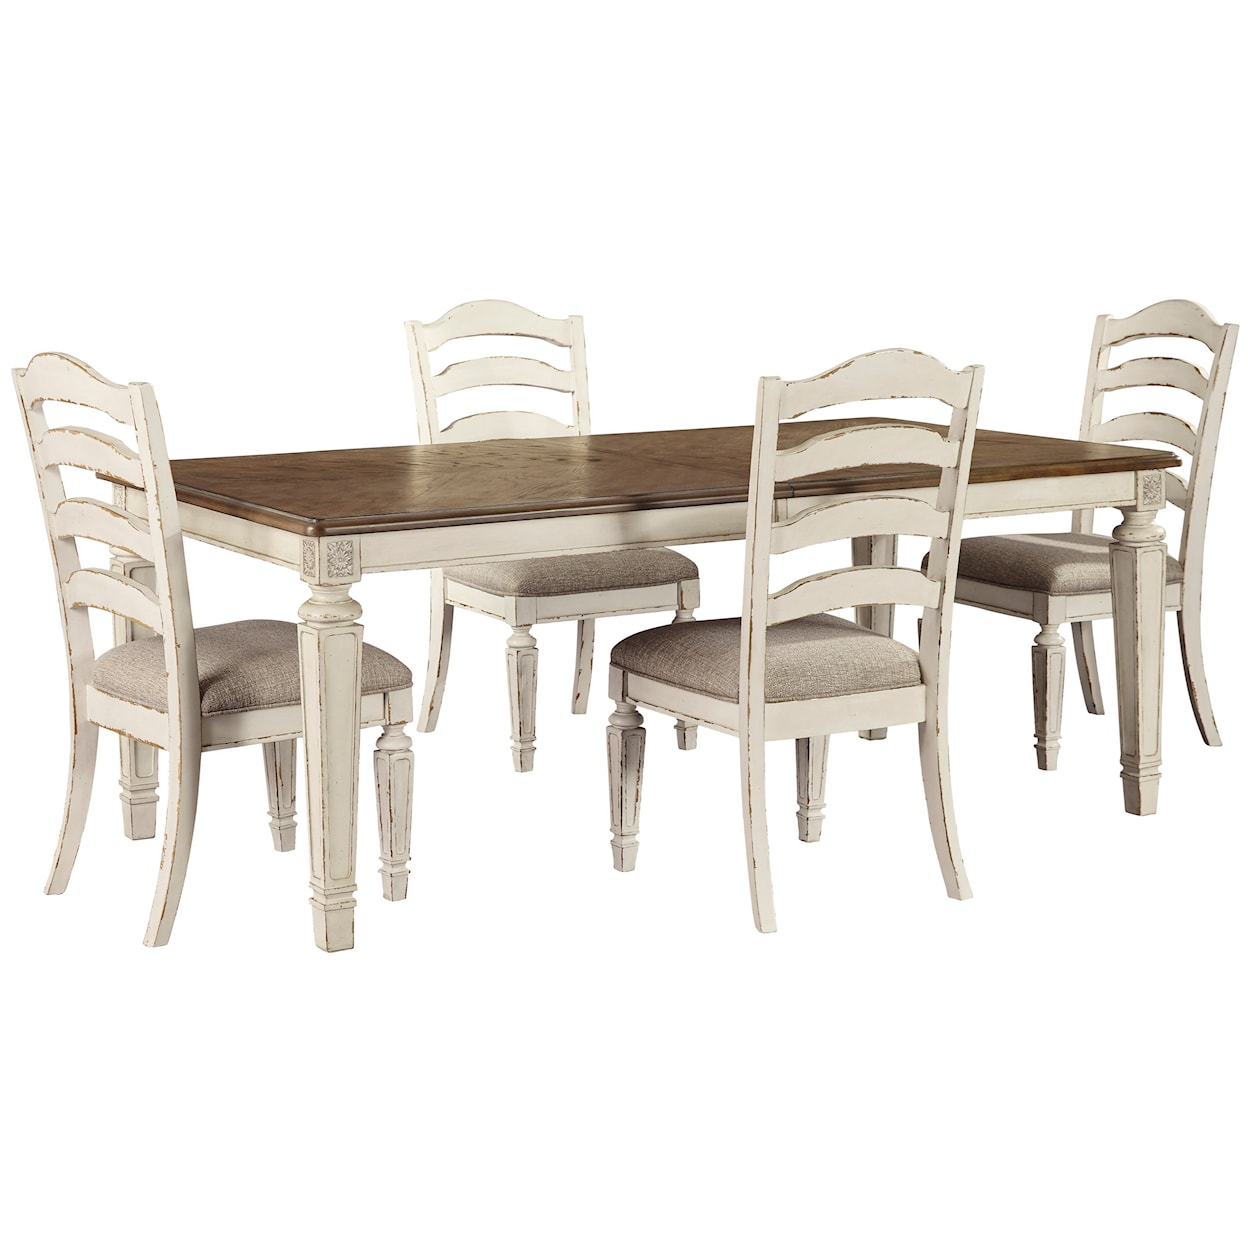 Signature Design by Ashley Realyn 5-Piece Dining Set